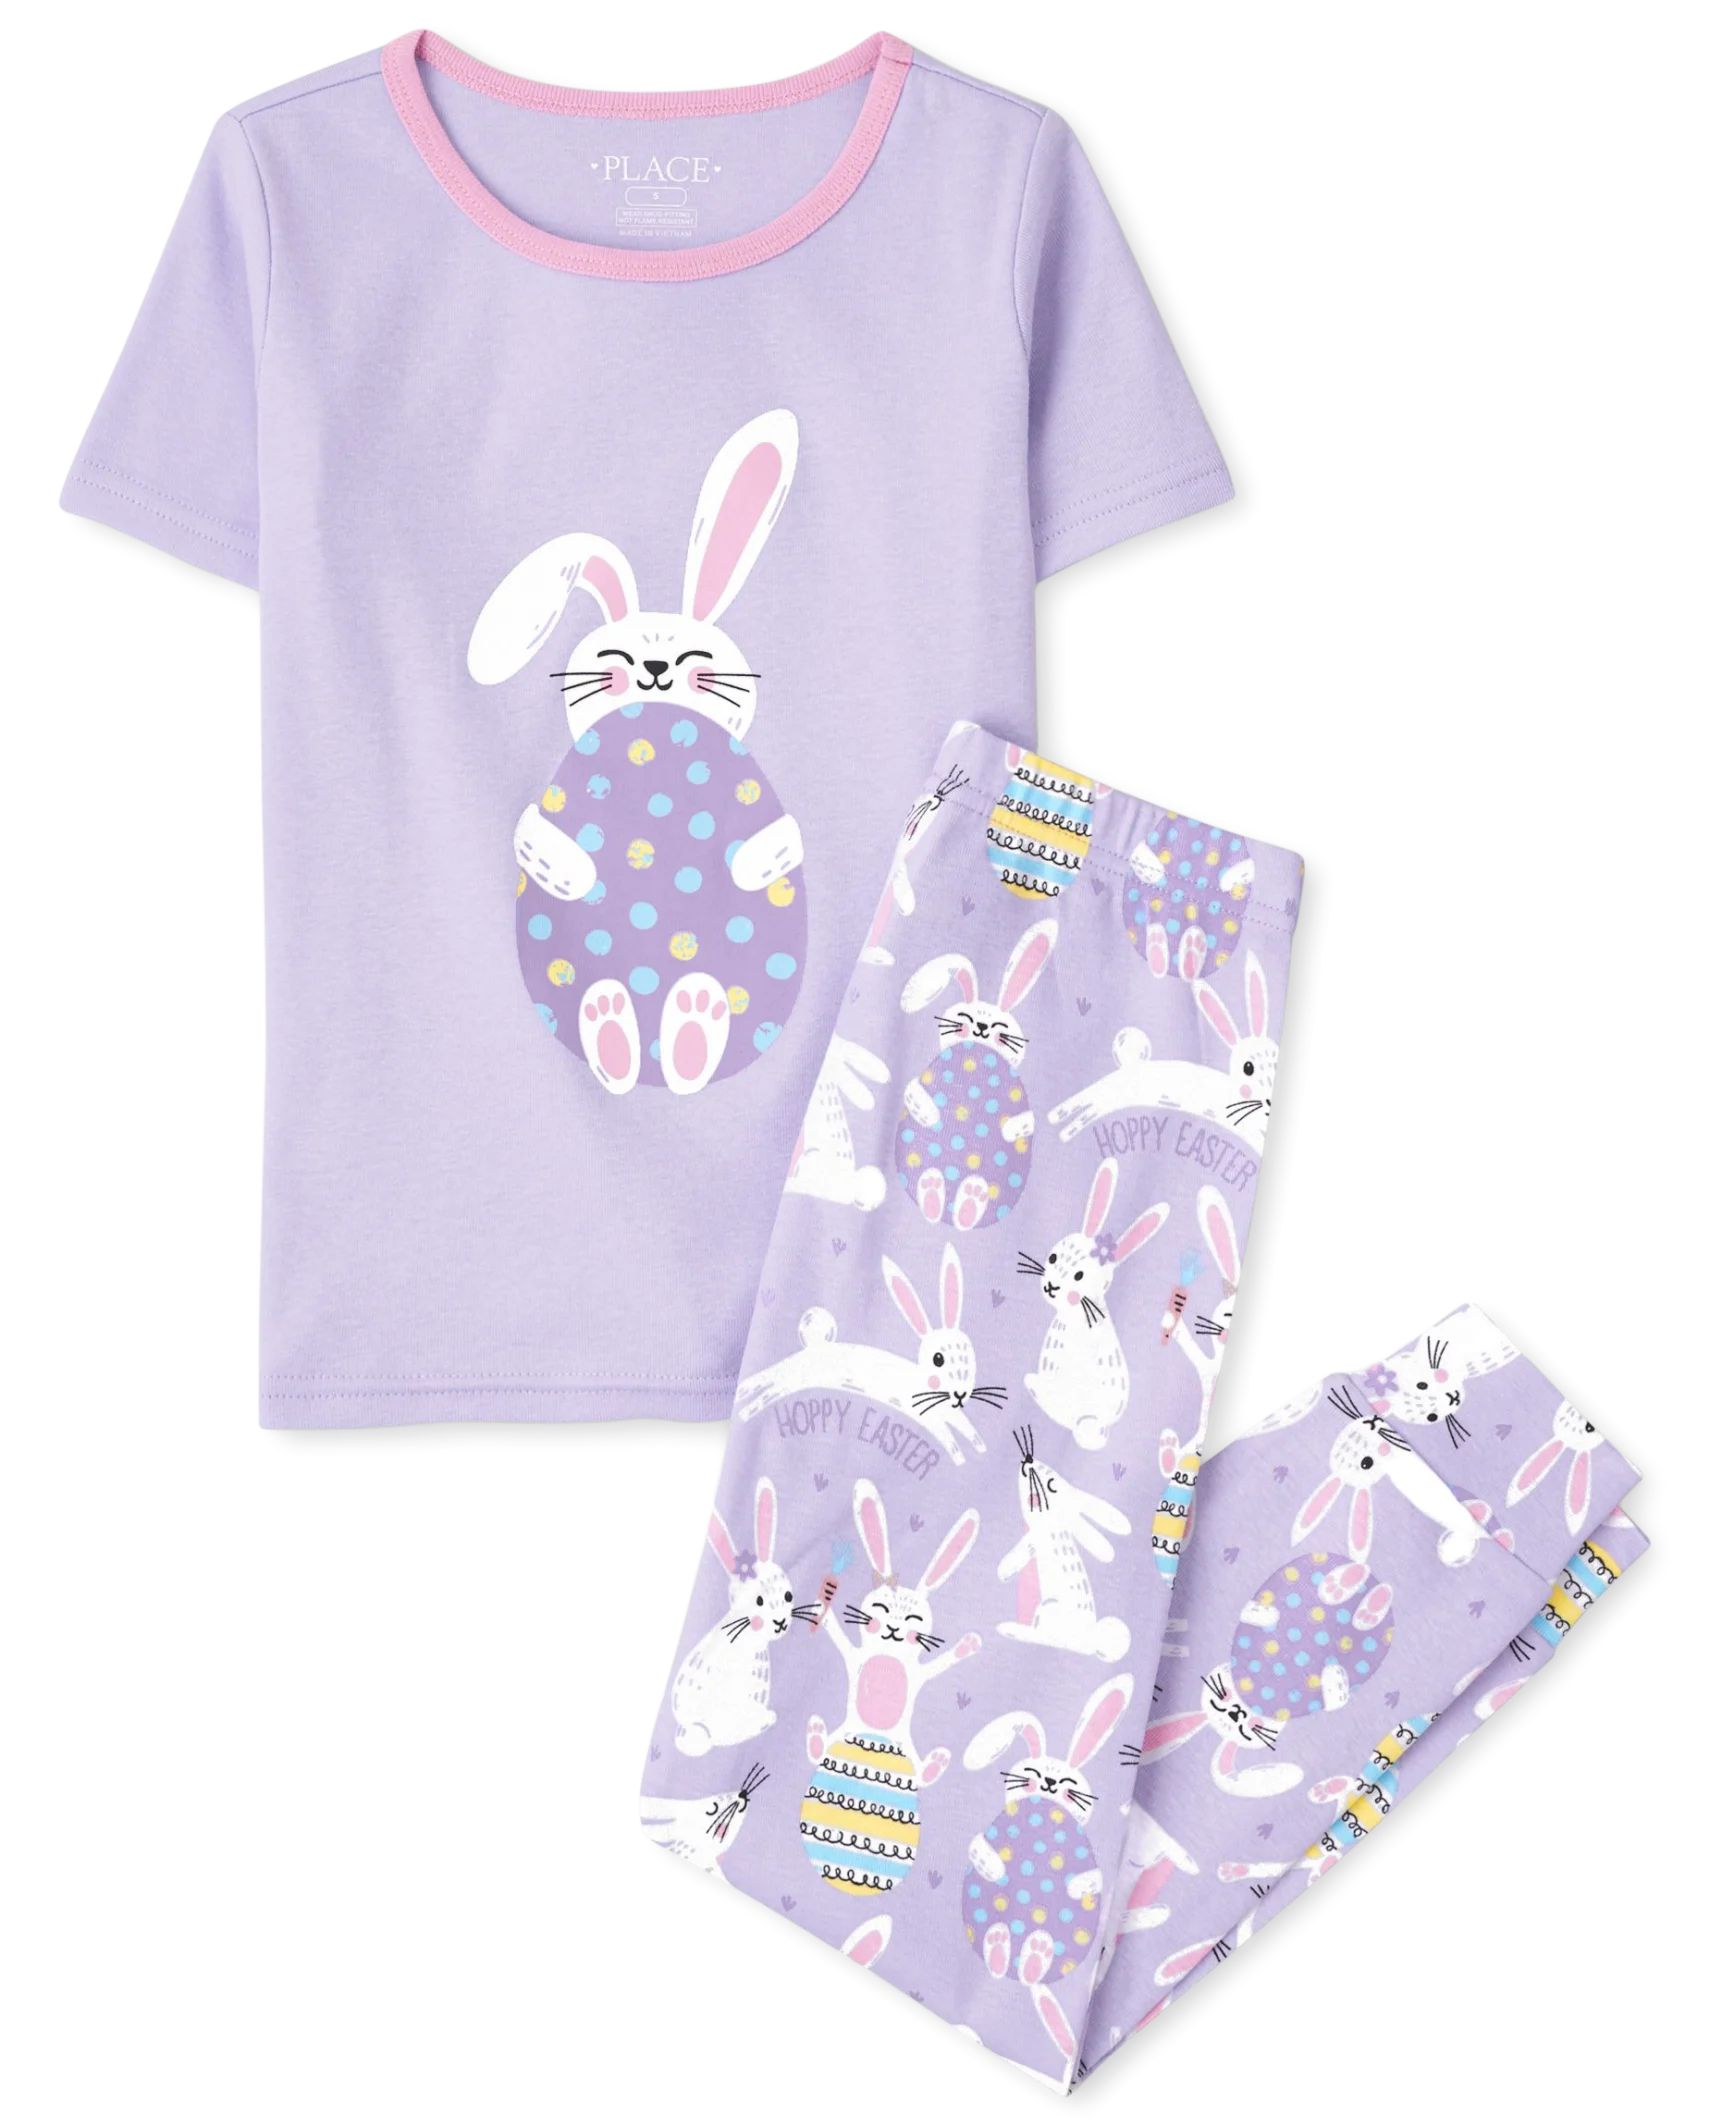 Girls Bunny Snug Fit Cotton Pajamas - lovely lavender | The Children's Place